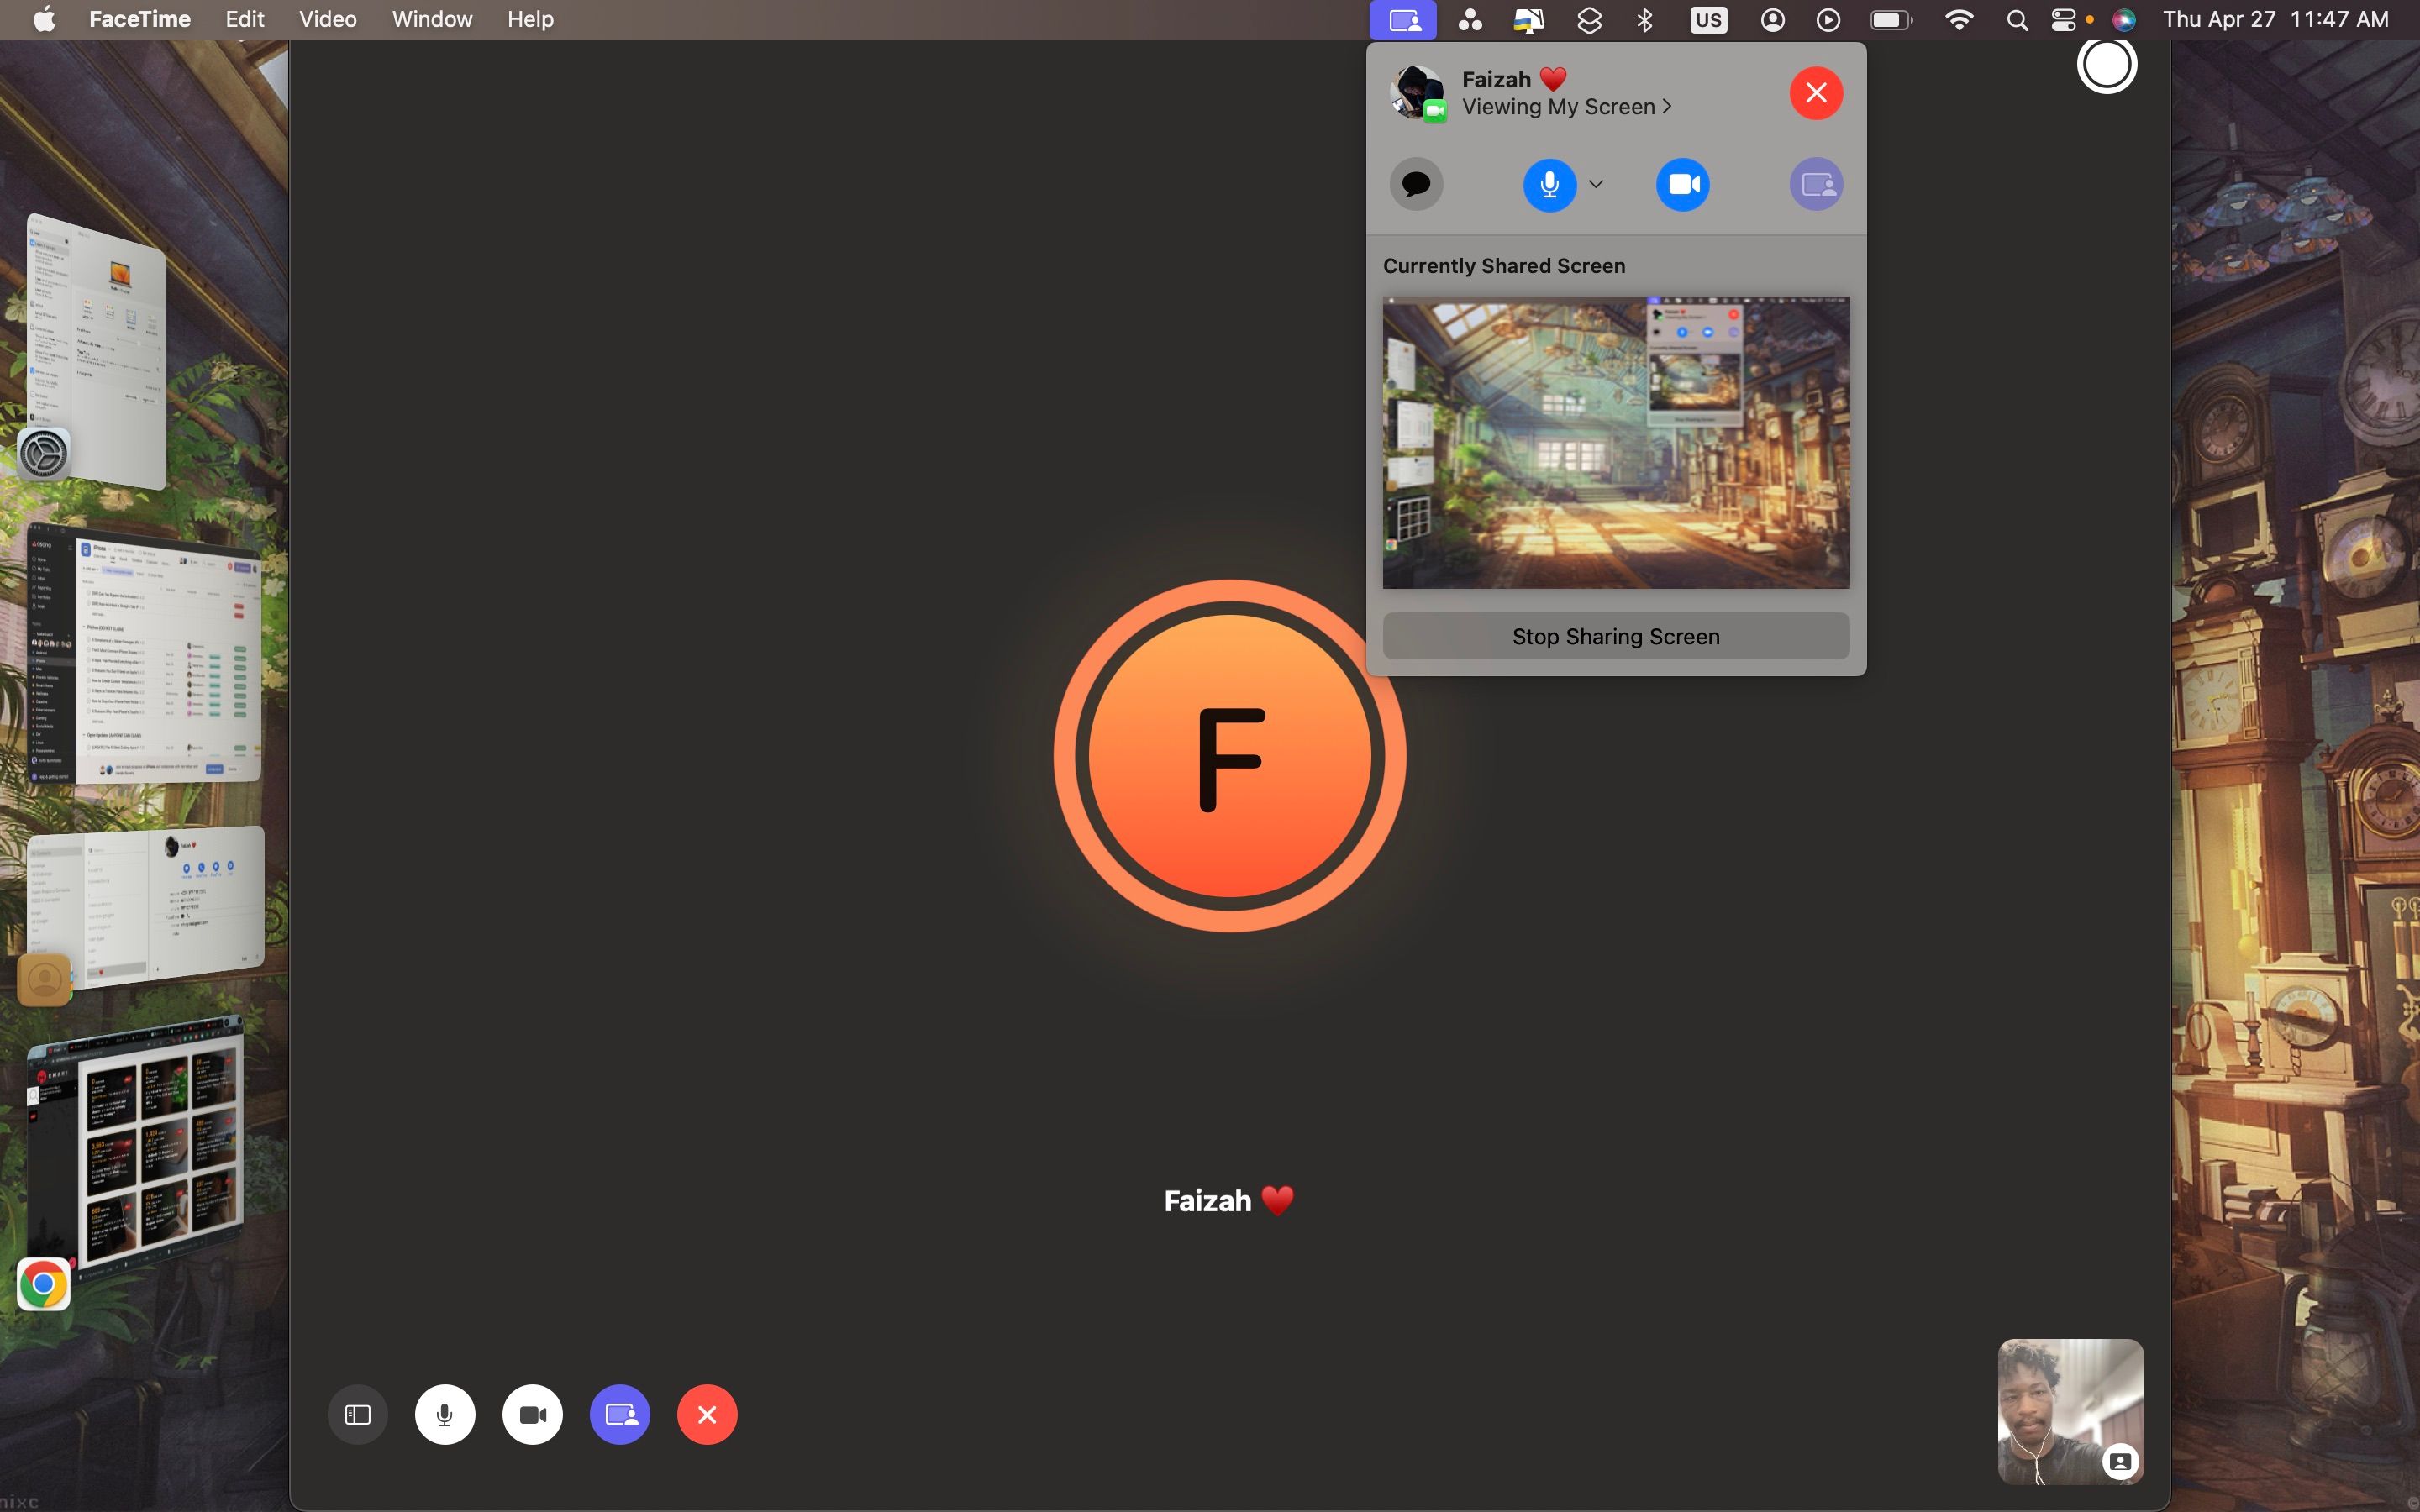 Sharing Screen menu on a FaceTime call